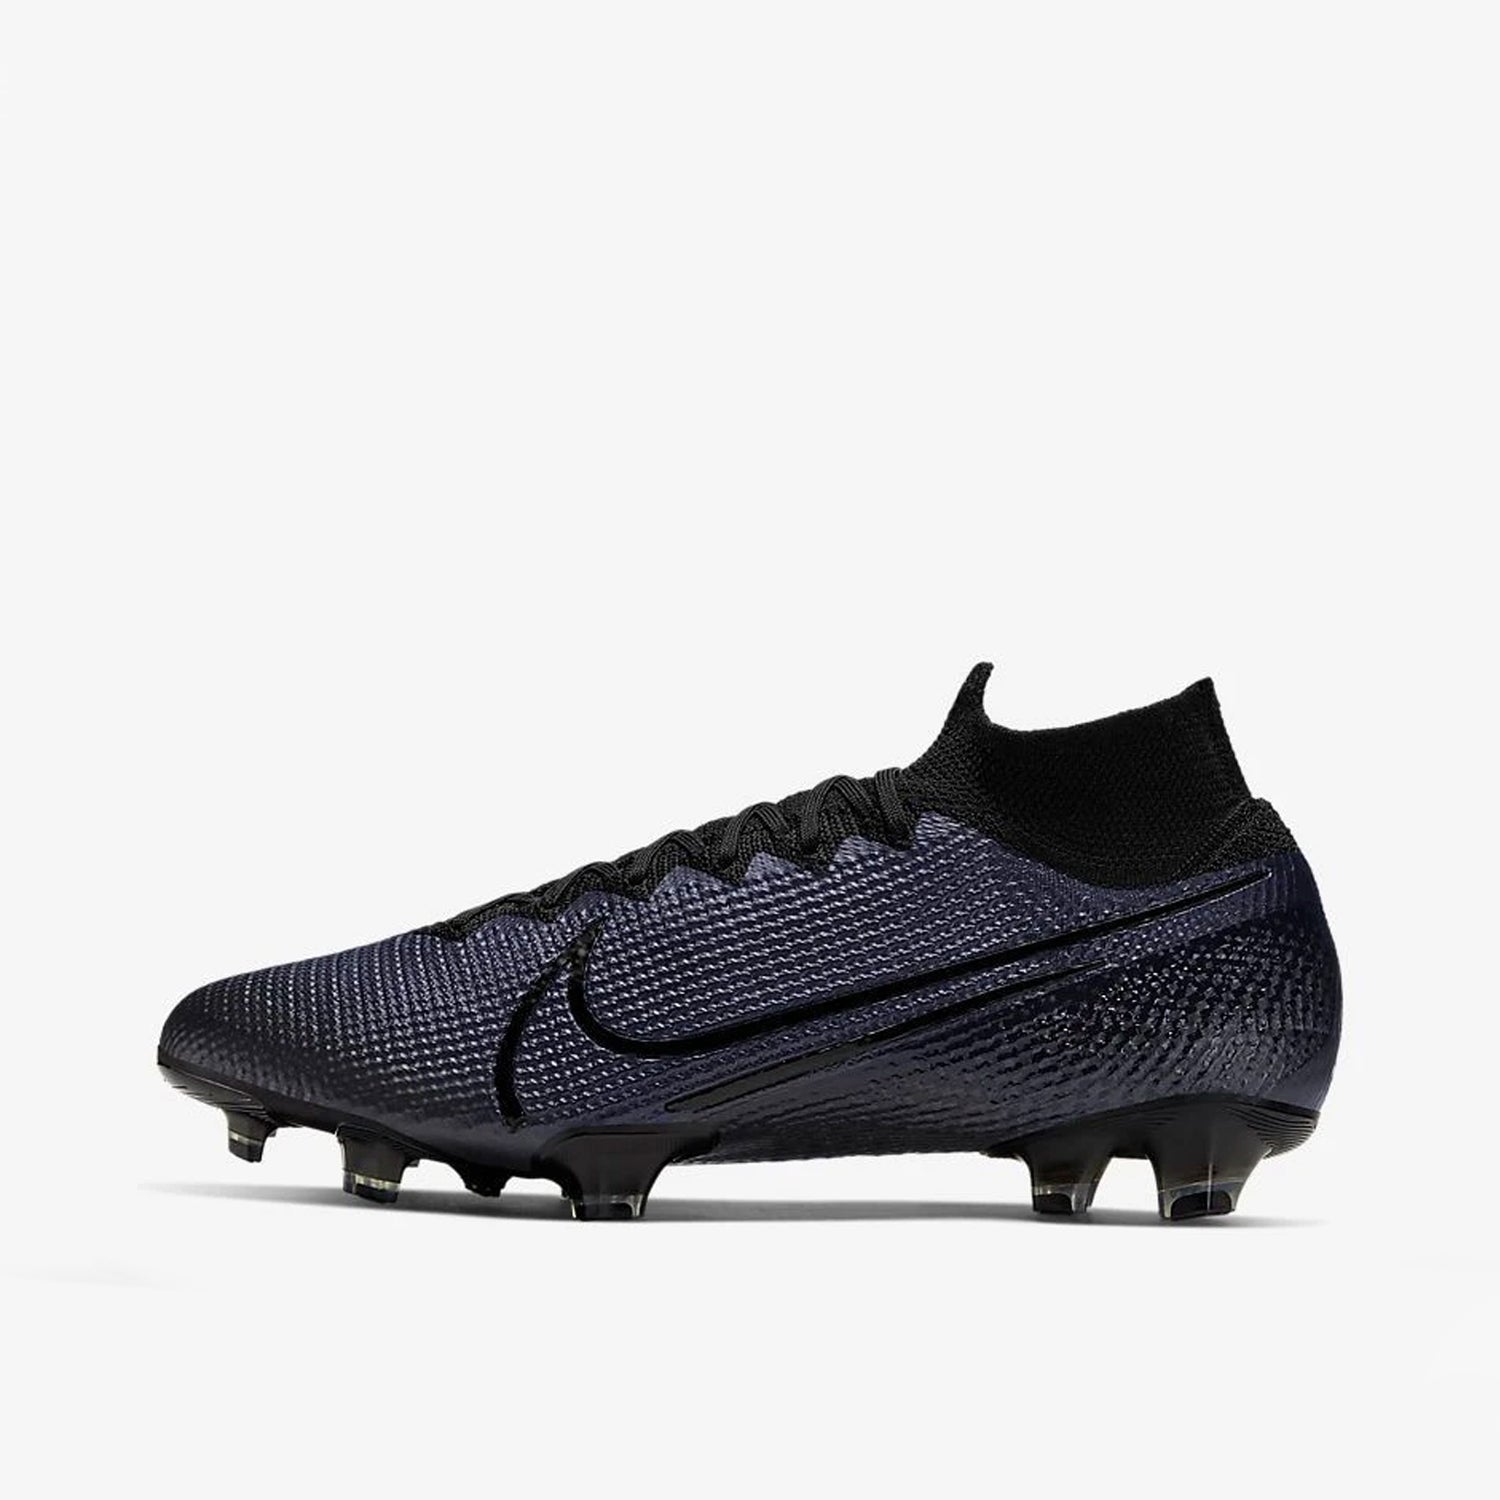 Superfly Elite Firm Soccer Cleats Black